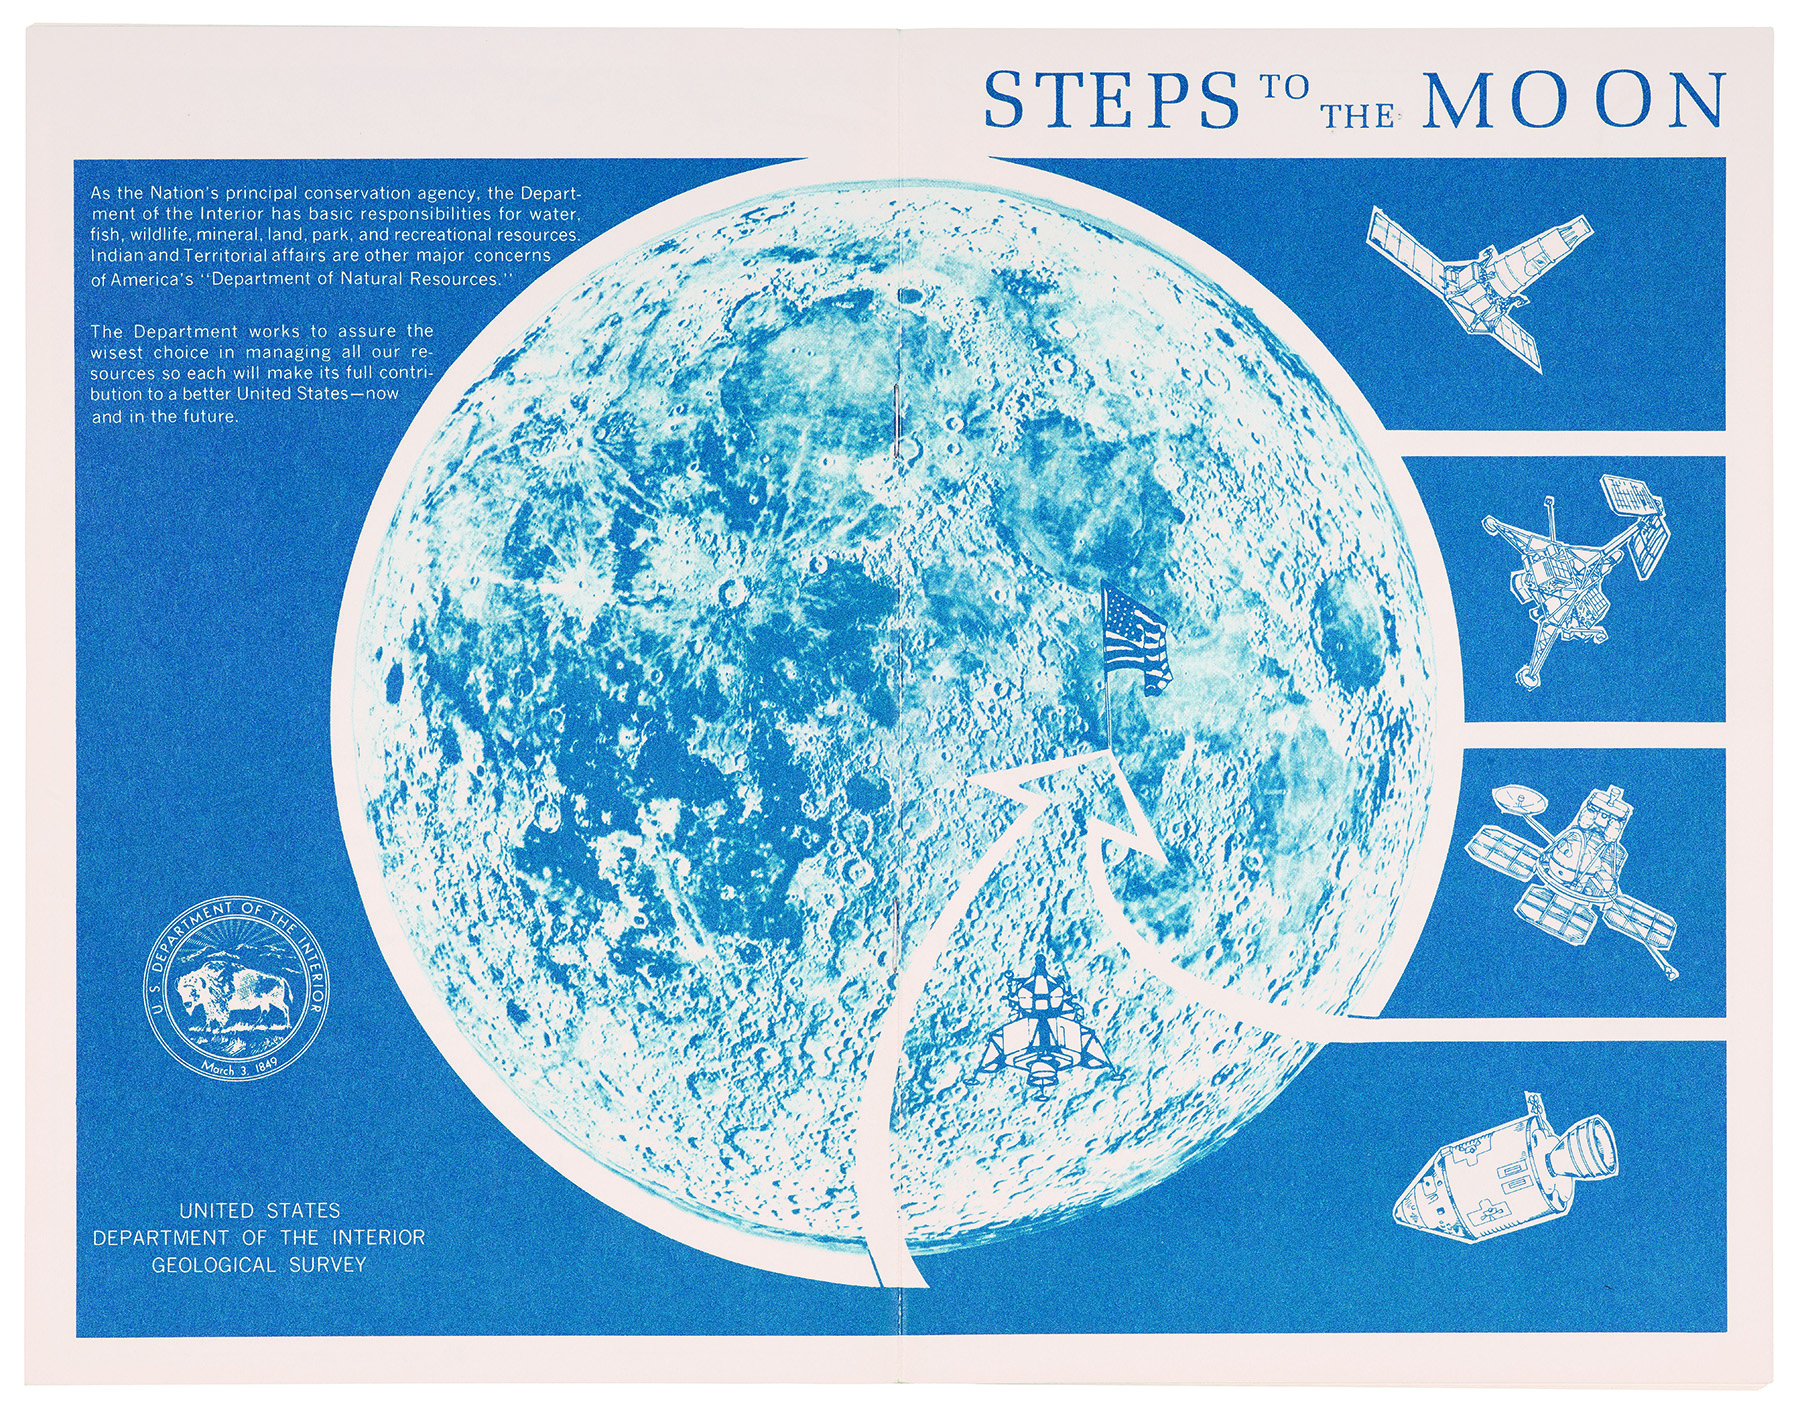 Steps to the Moon by the United States Department of the Interior Geological Survey, from the Apollo Mission 11 information kit, United States Air Force, Aeronautial Chart and Information Centre, ST. Louis, 1969. British Library, London. 